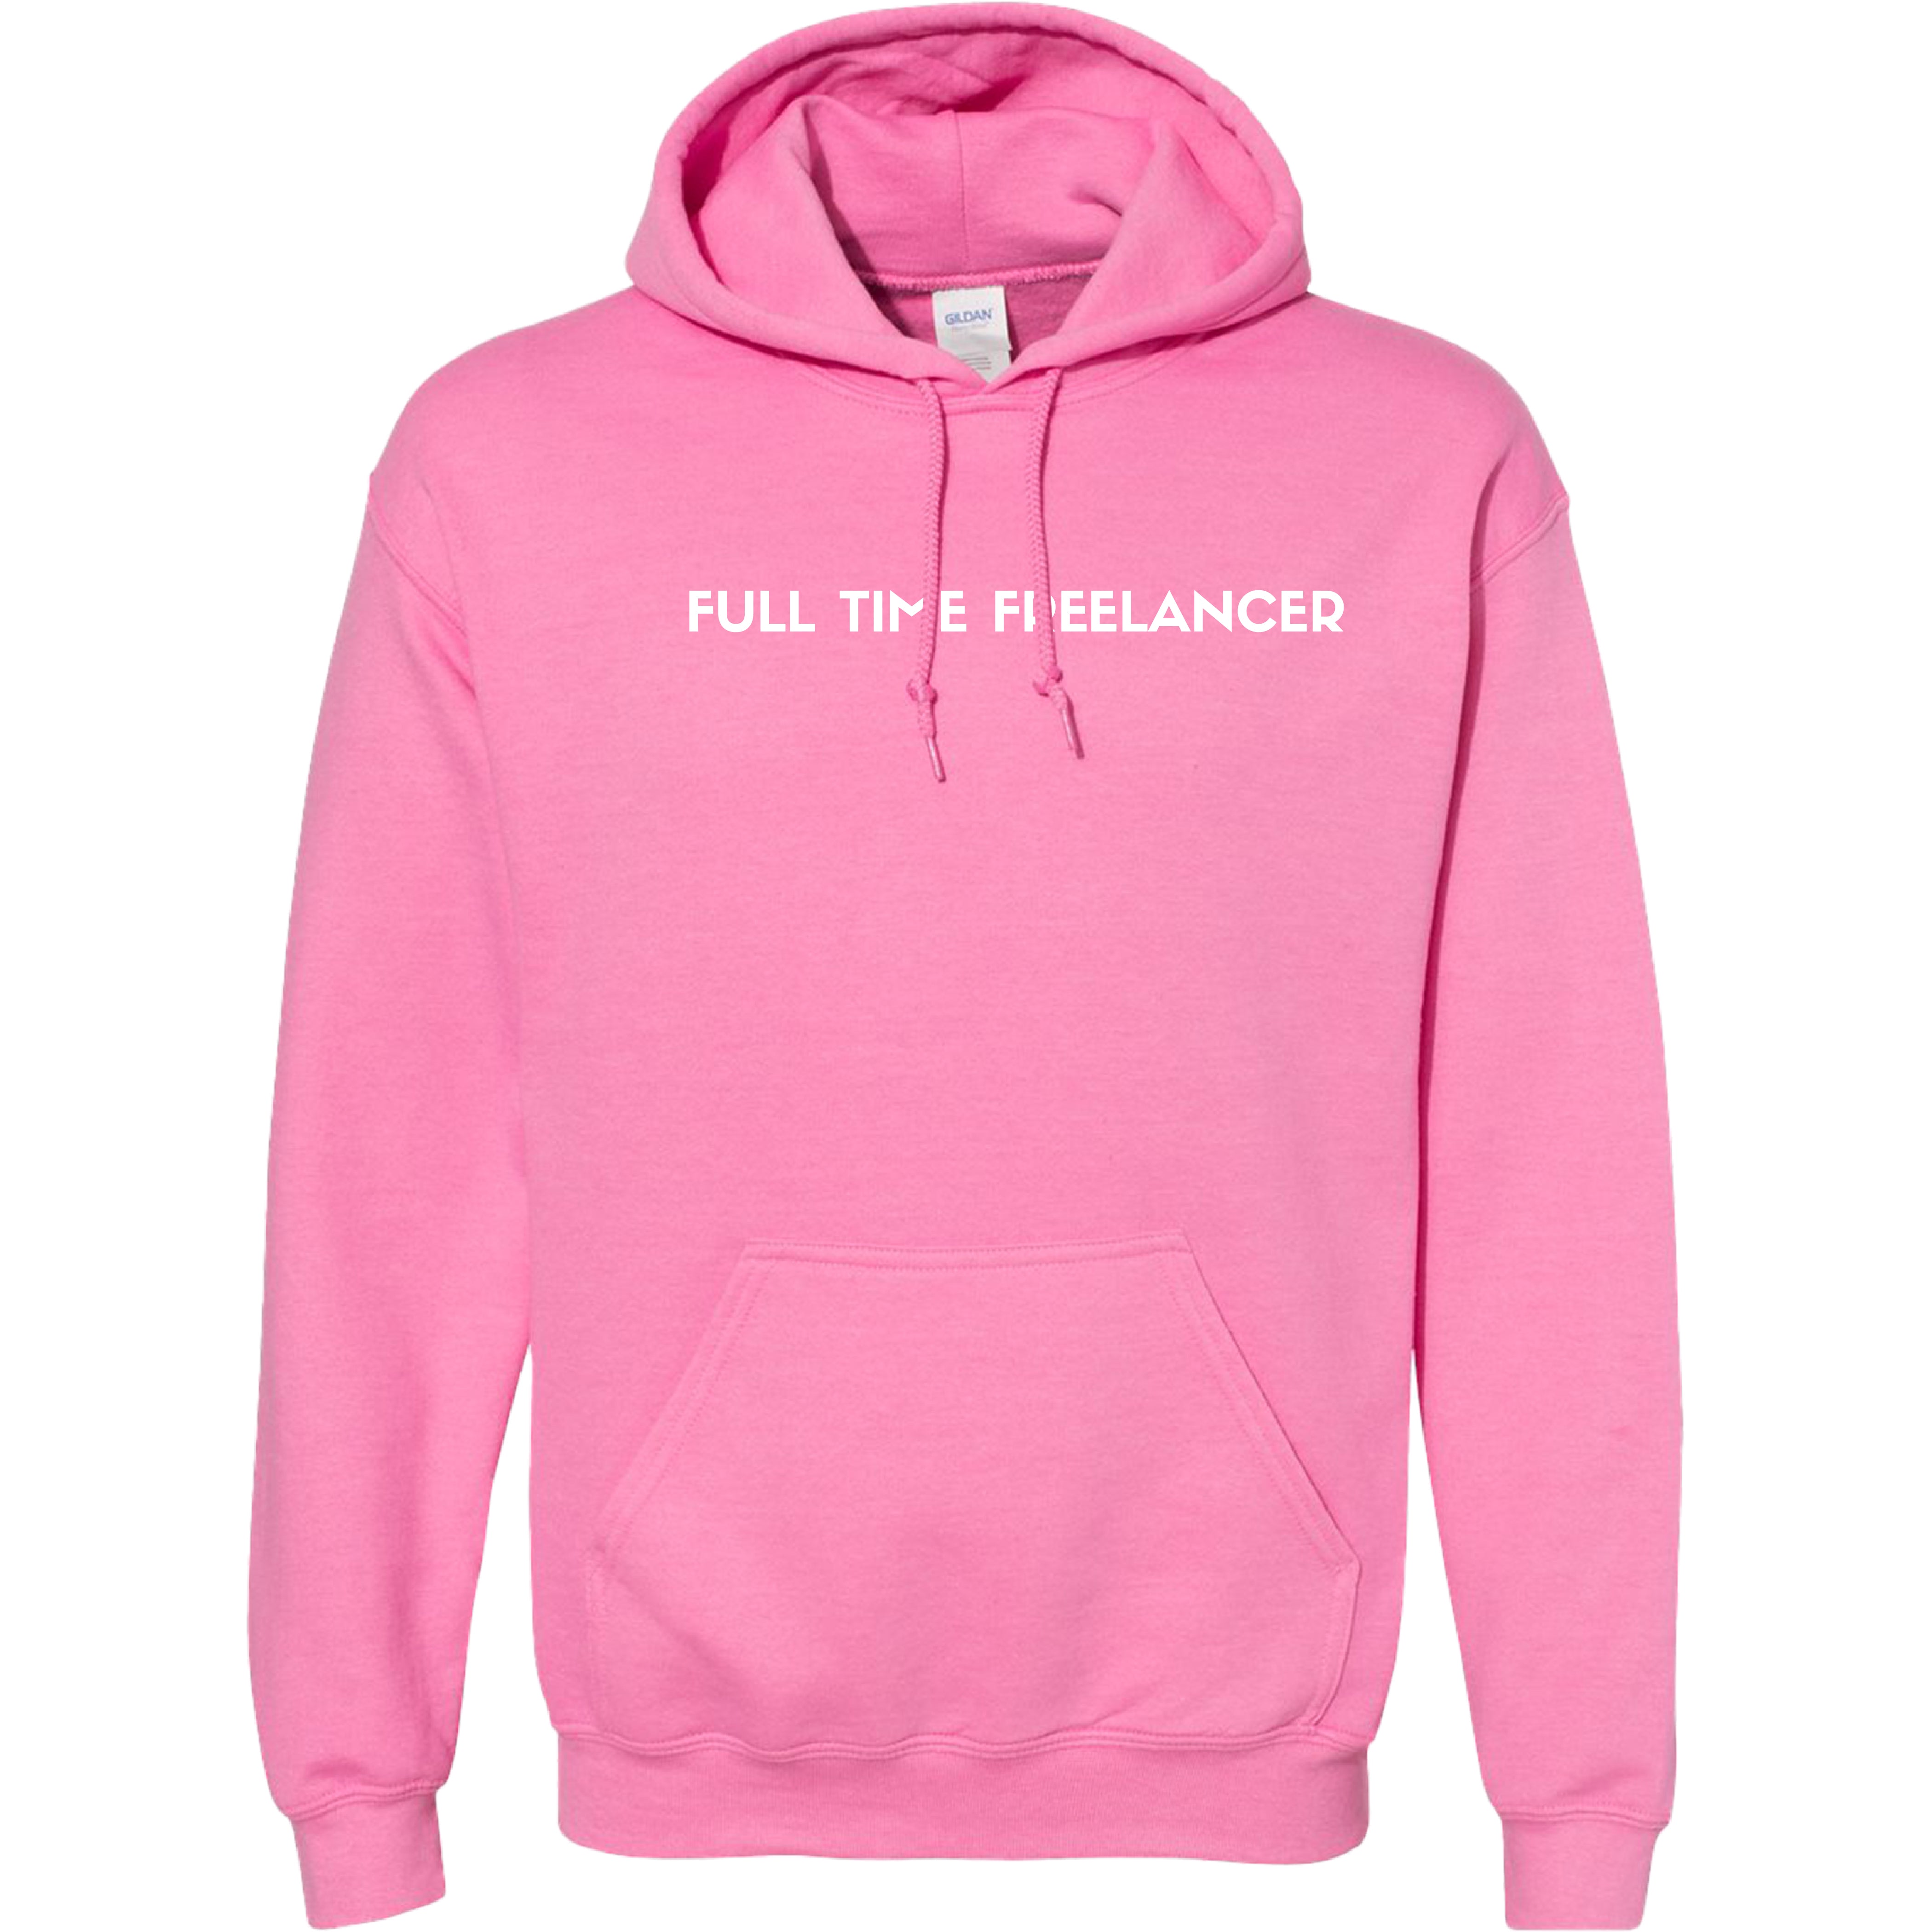 Freelance with Phil - Full Time Freelancer Hoodie